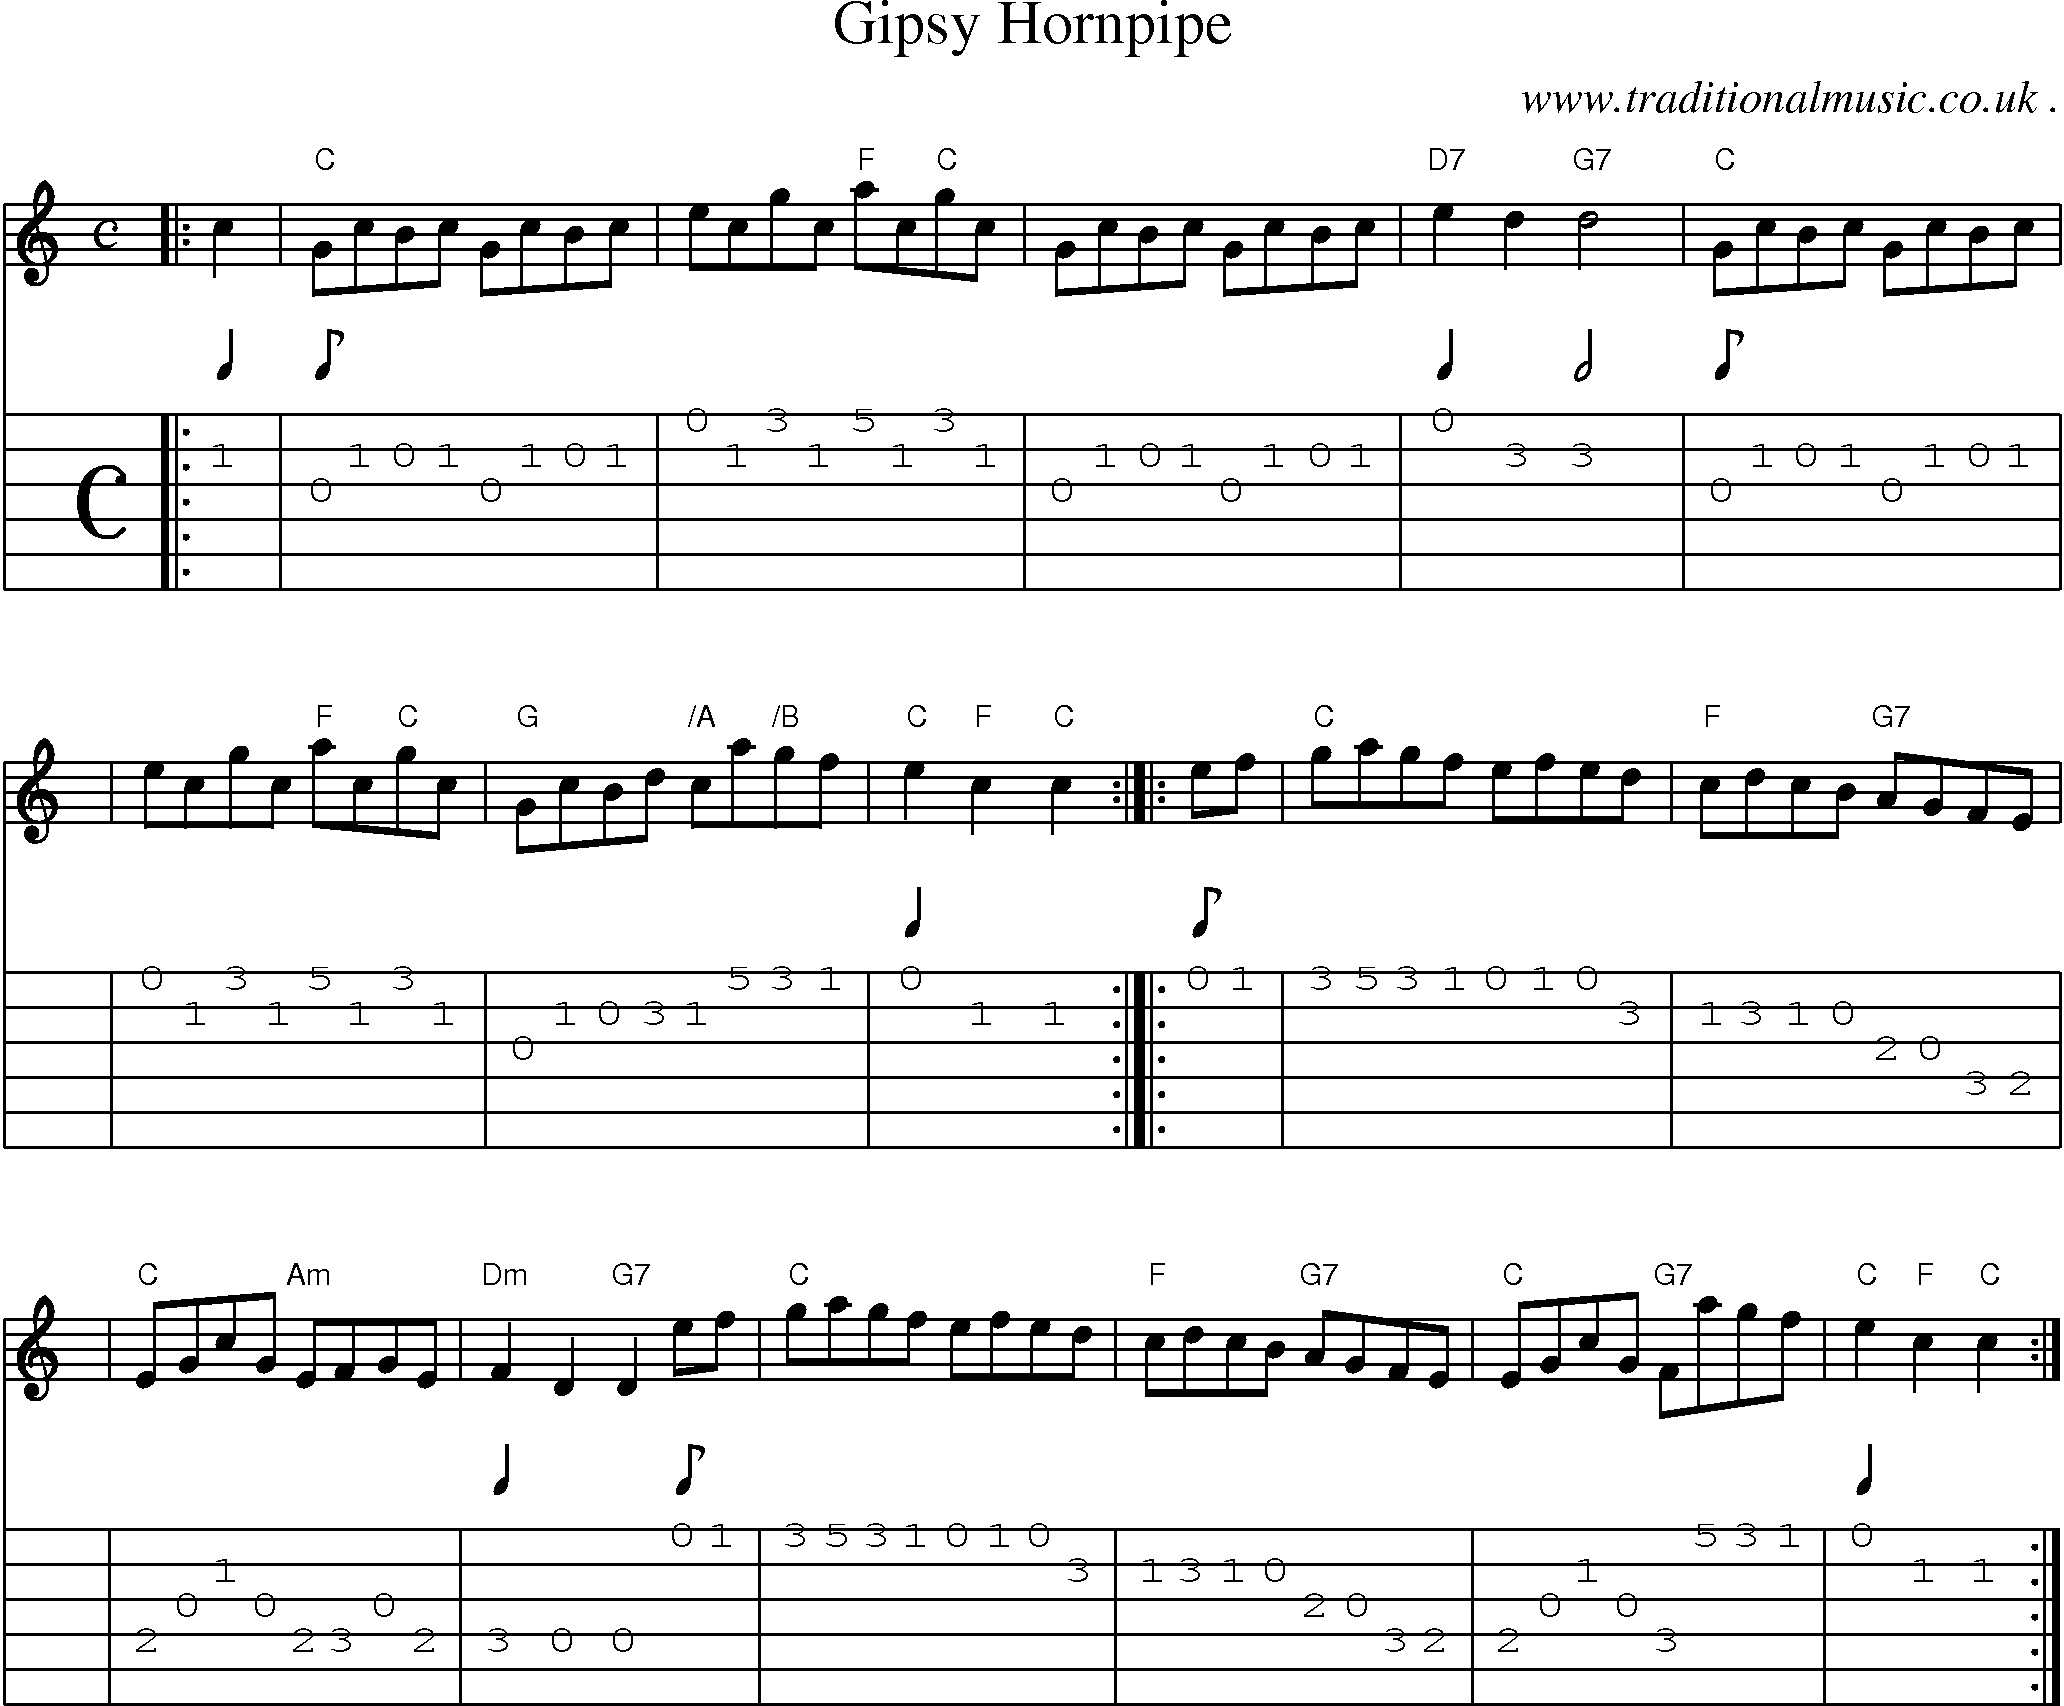 Sheet-music  score, Chords and Guitar Tabs for Gipsy Hornpipe